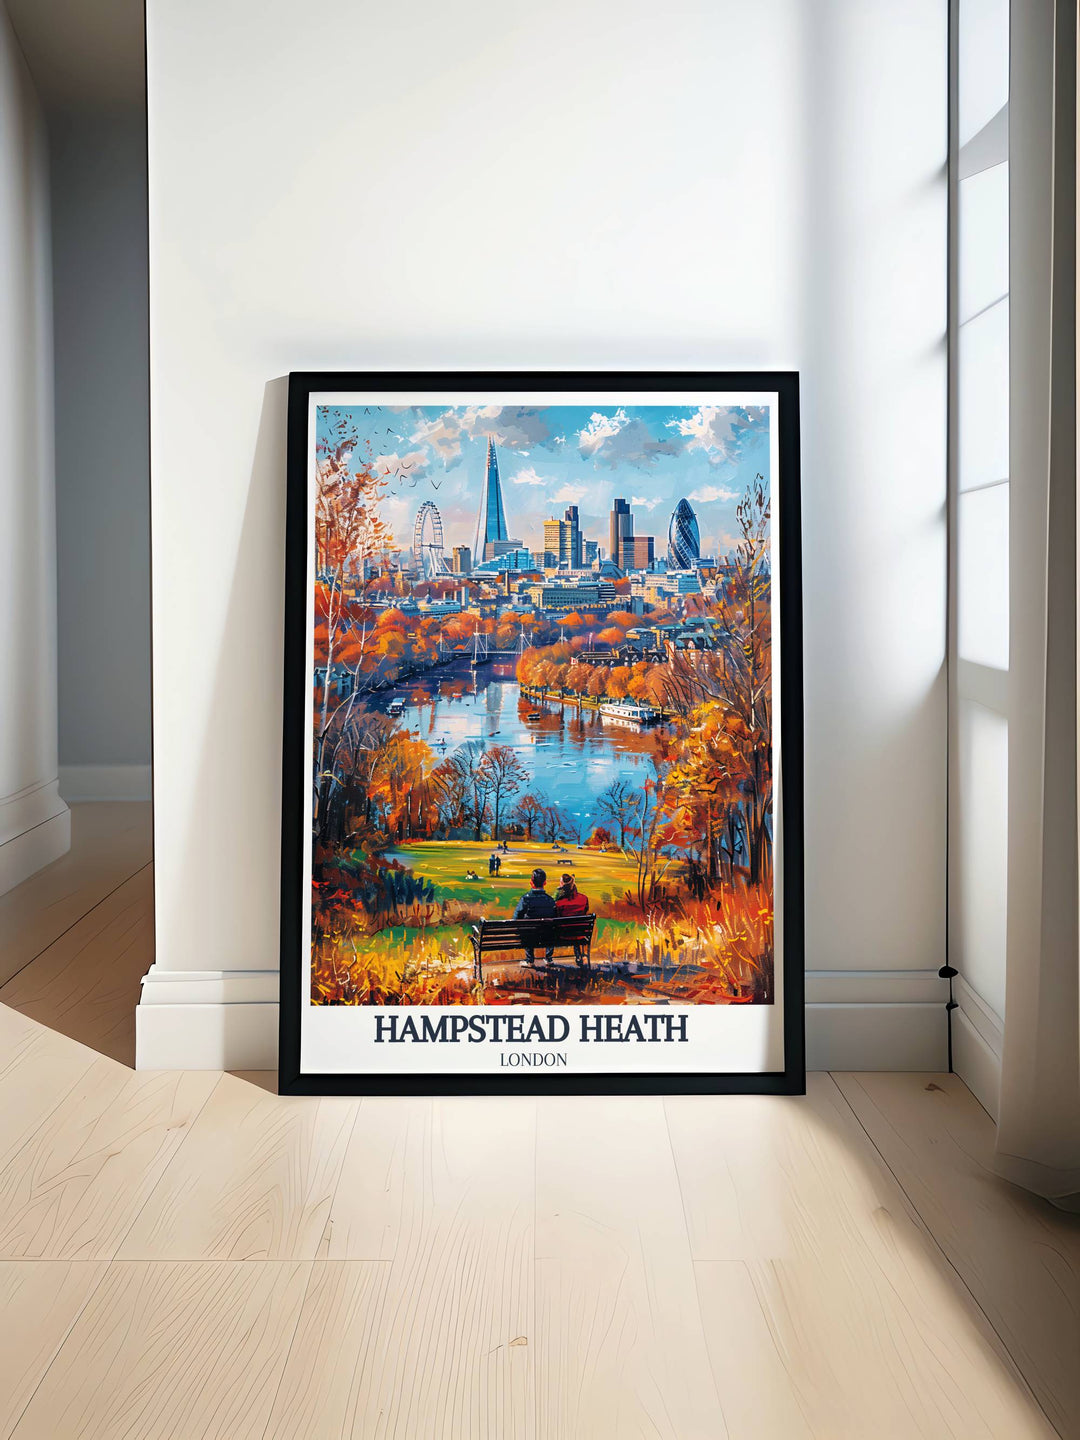 Vibrant poster of Hampstead Heath with London skyline in the background, capturing the essence of the citys green spaces and architectural marvels.